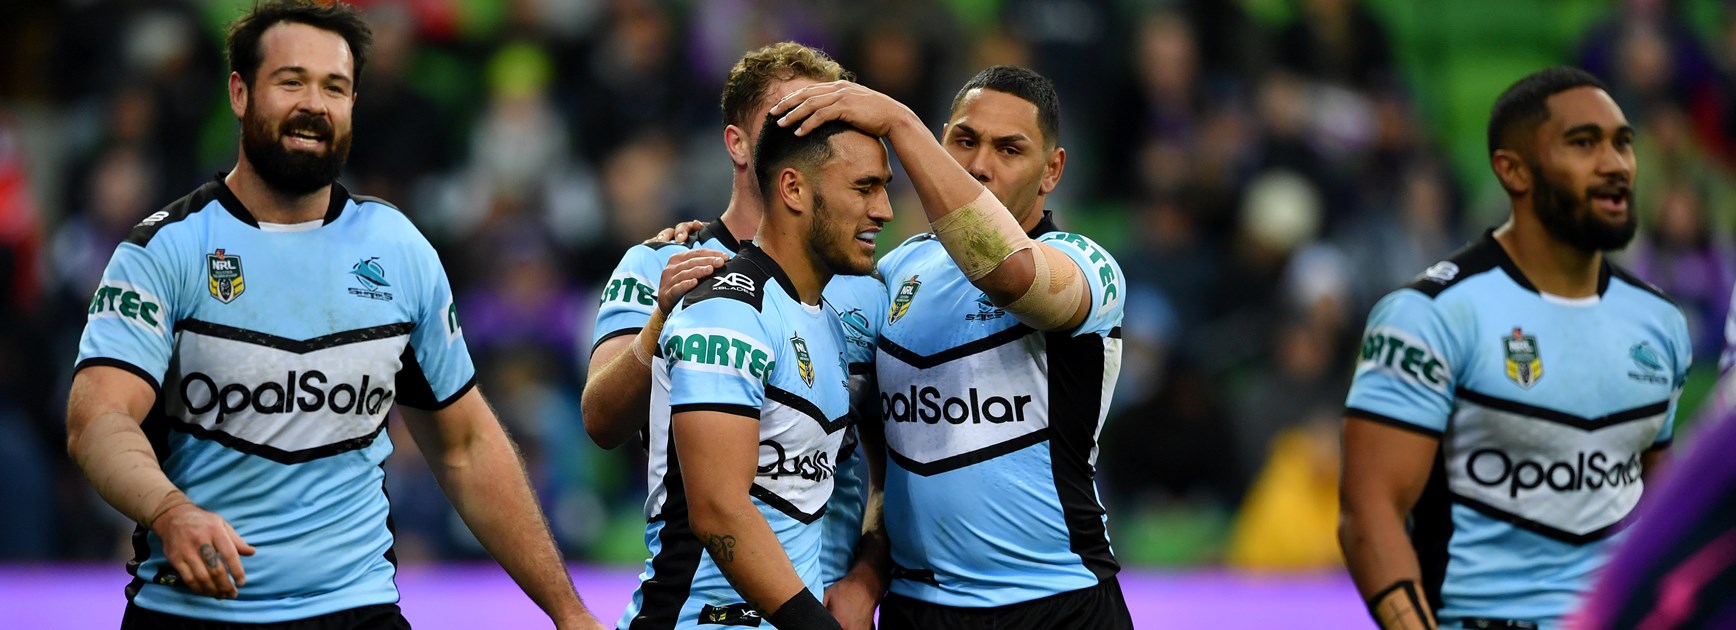 The Cronulla Sharks celebrate a try.